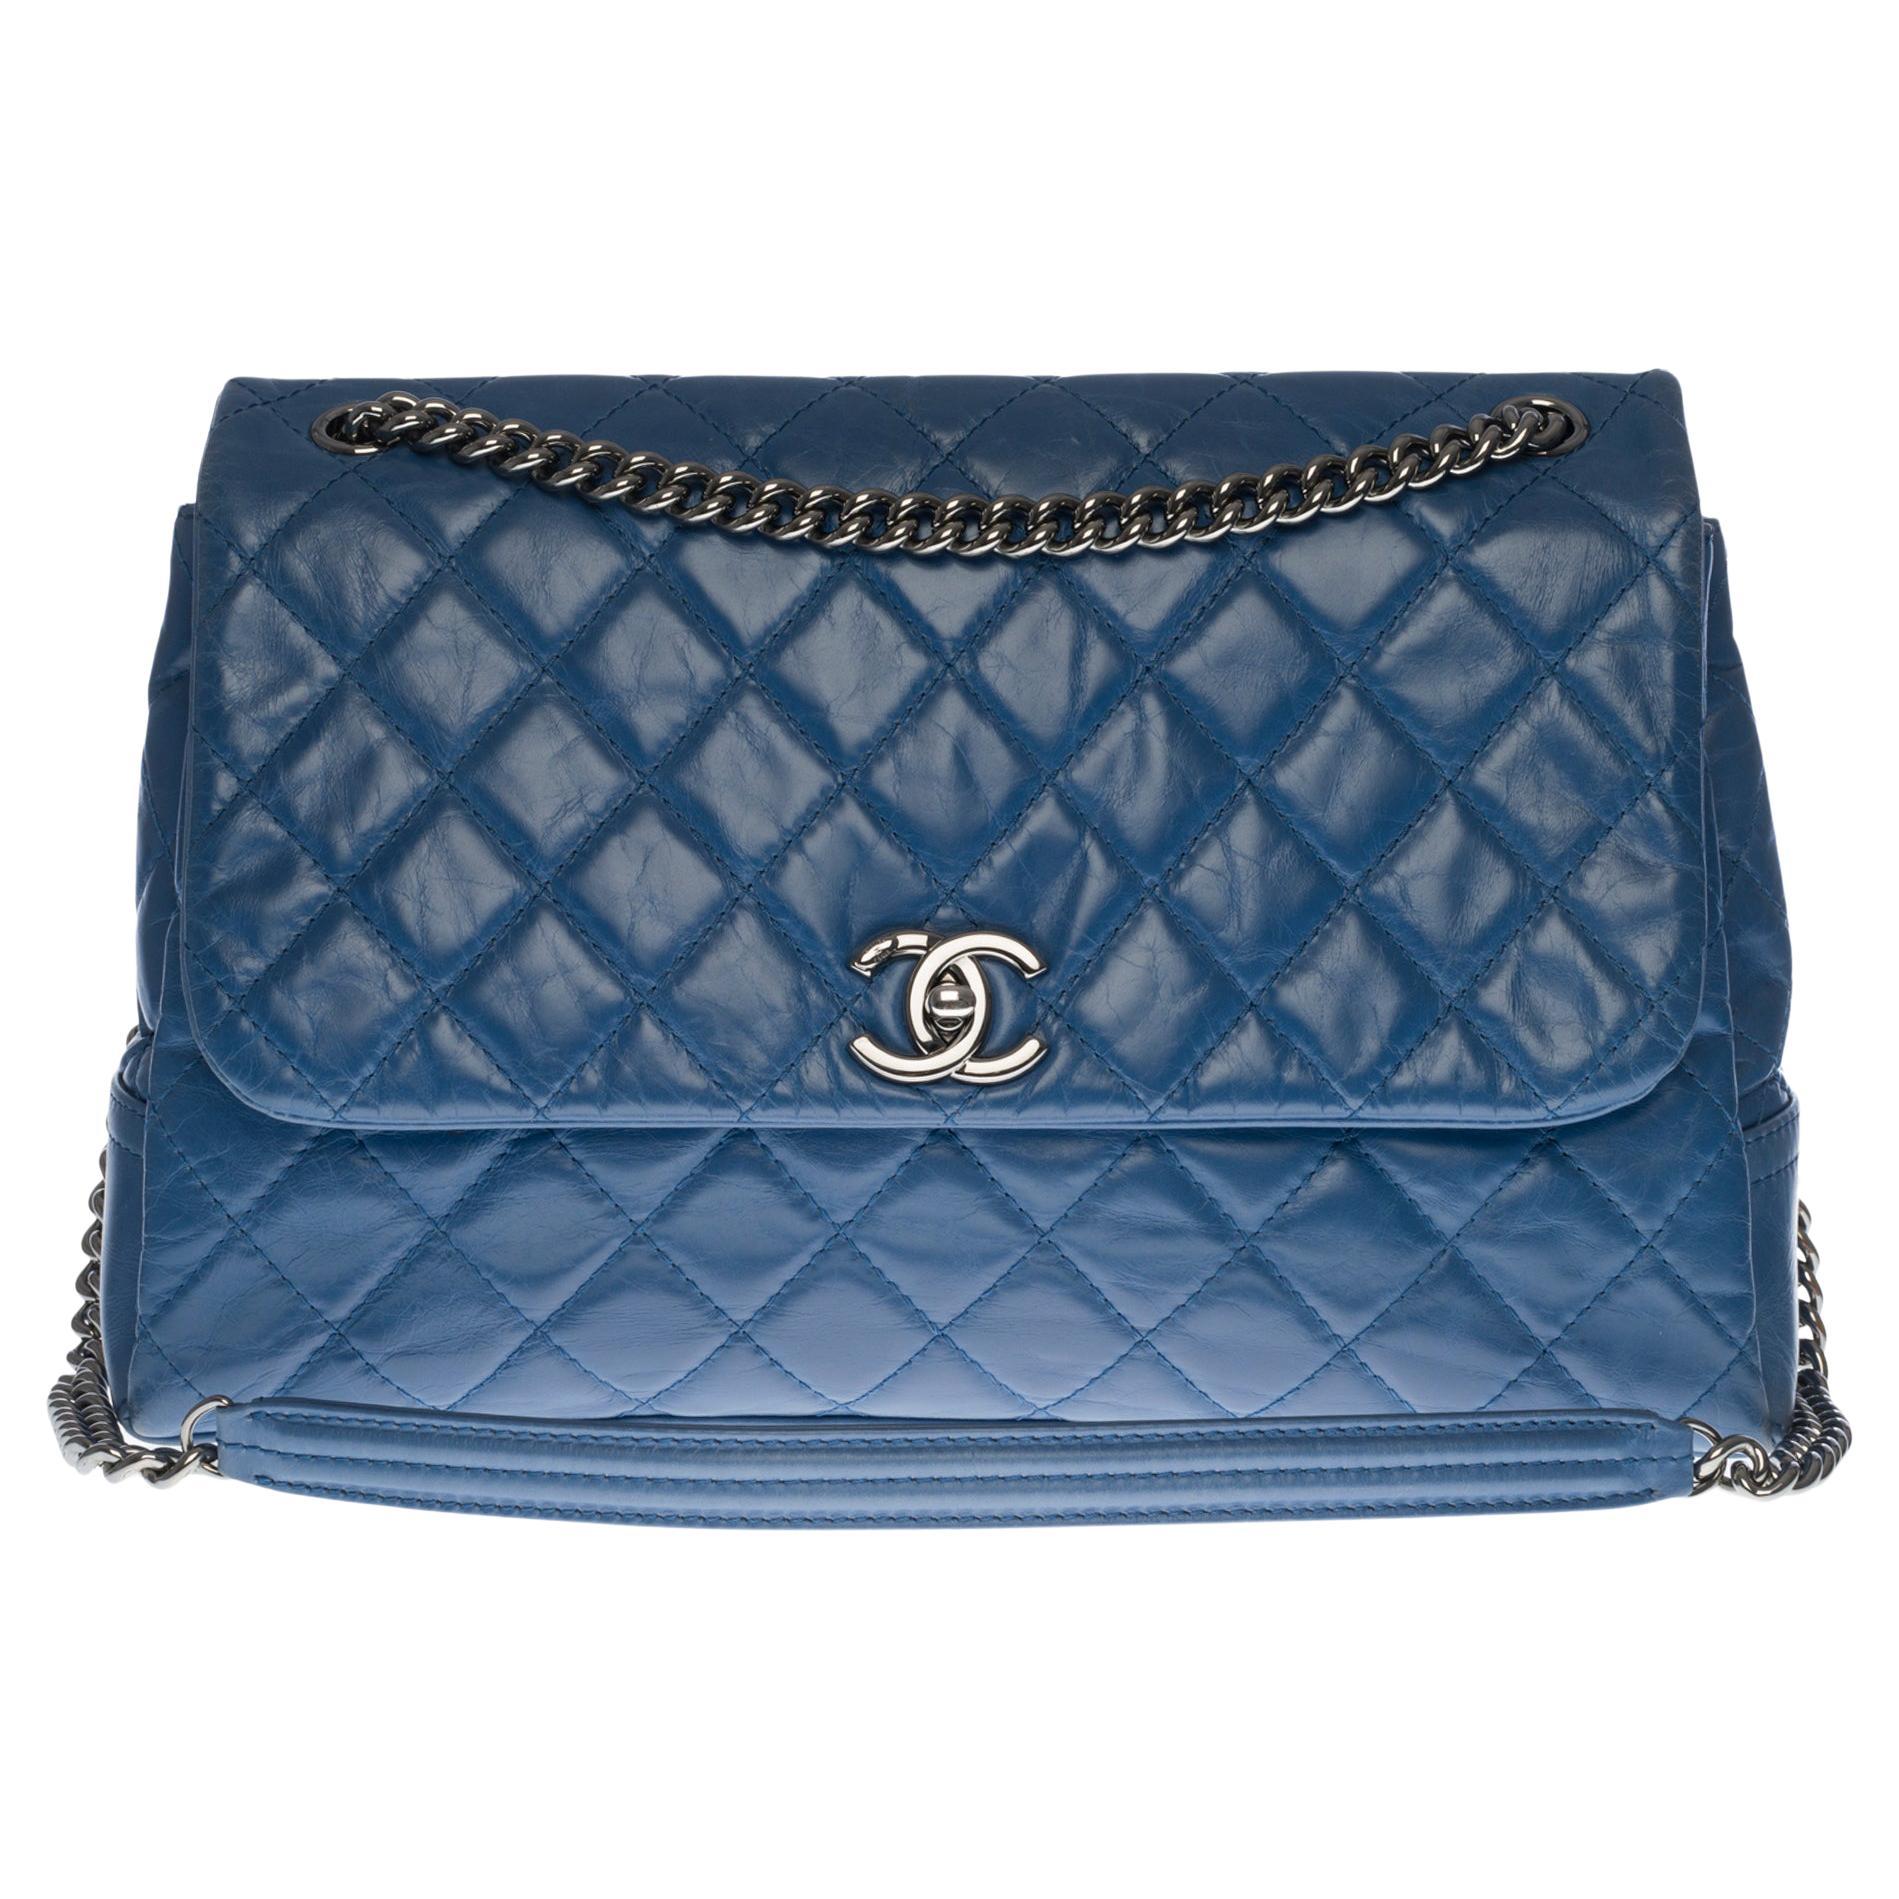 Chanel Classic Maxi Flap shoulder bag in blue quilted lambskin, SHW For Sale